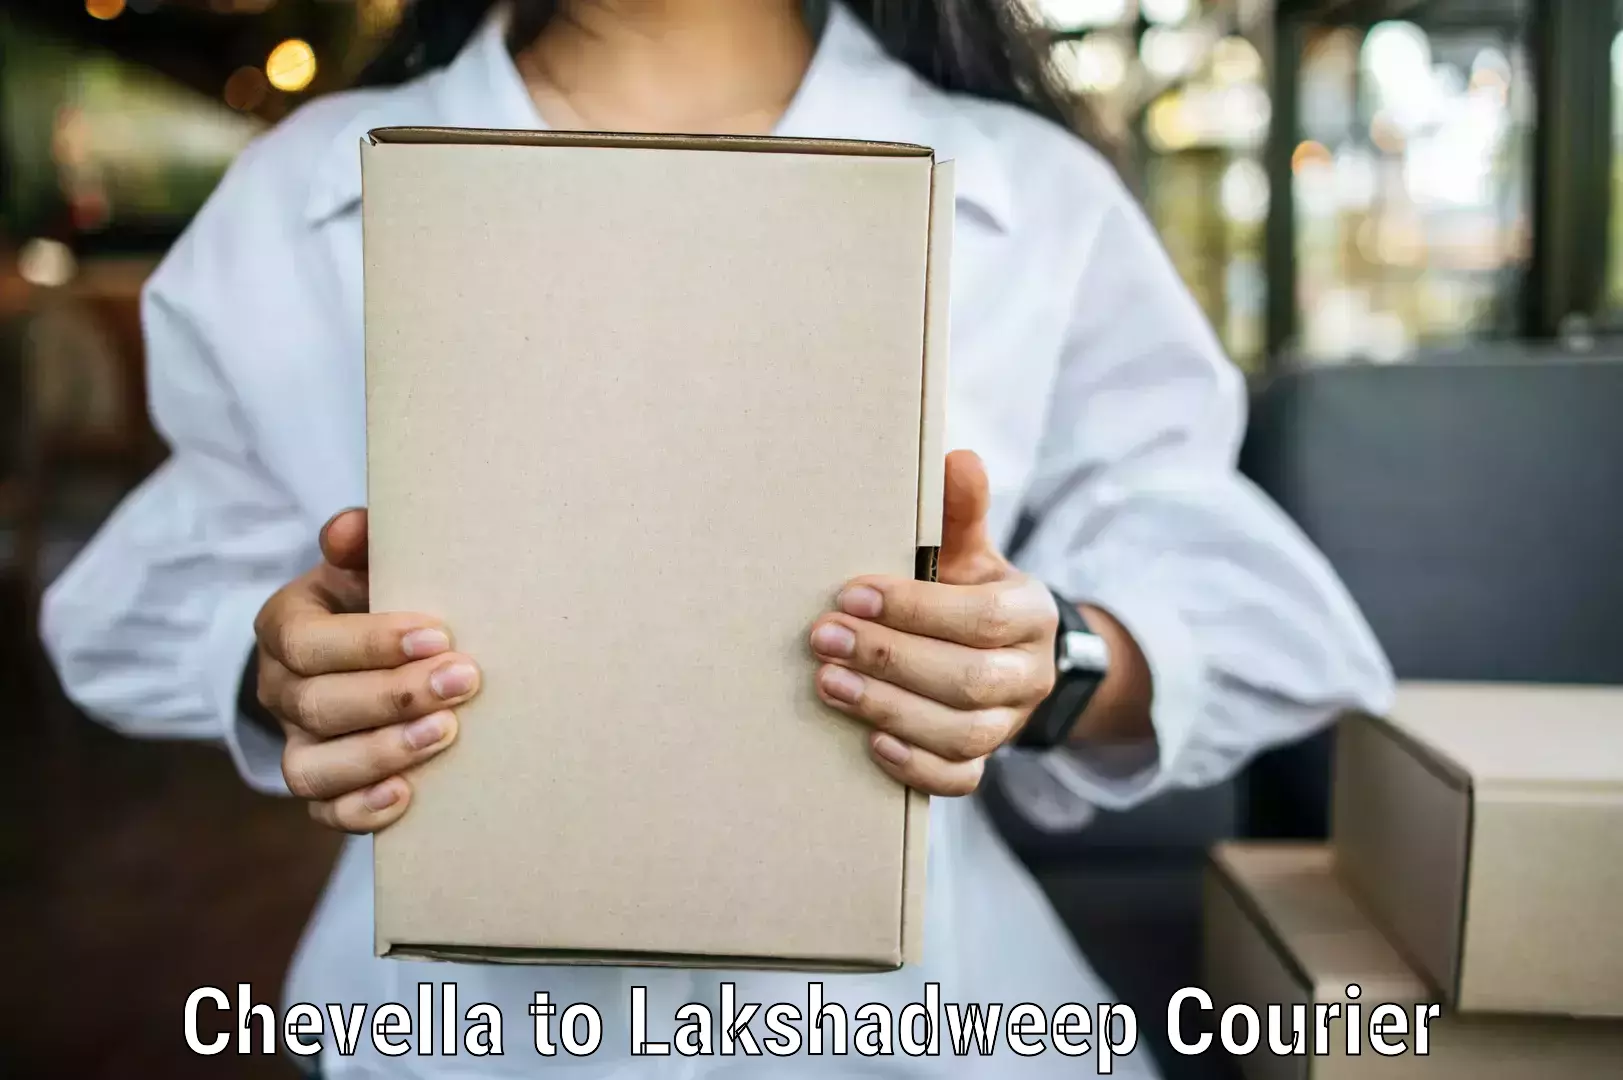 Ocean freight courier in Chevella to Lakshadweep